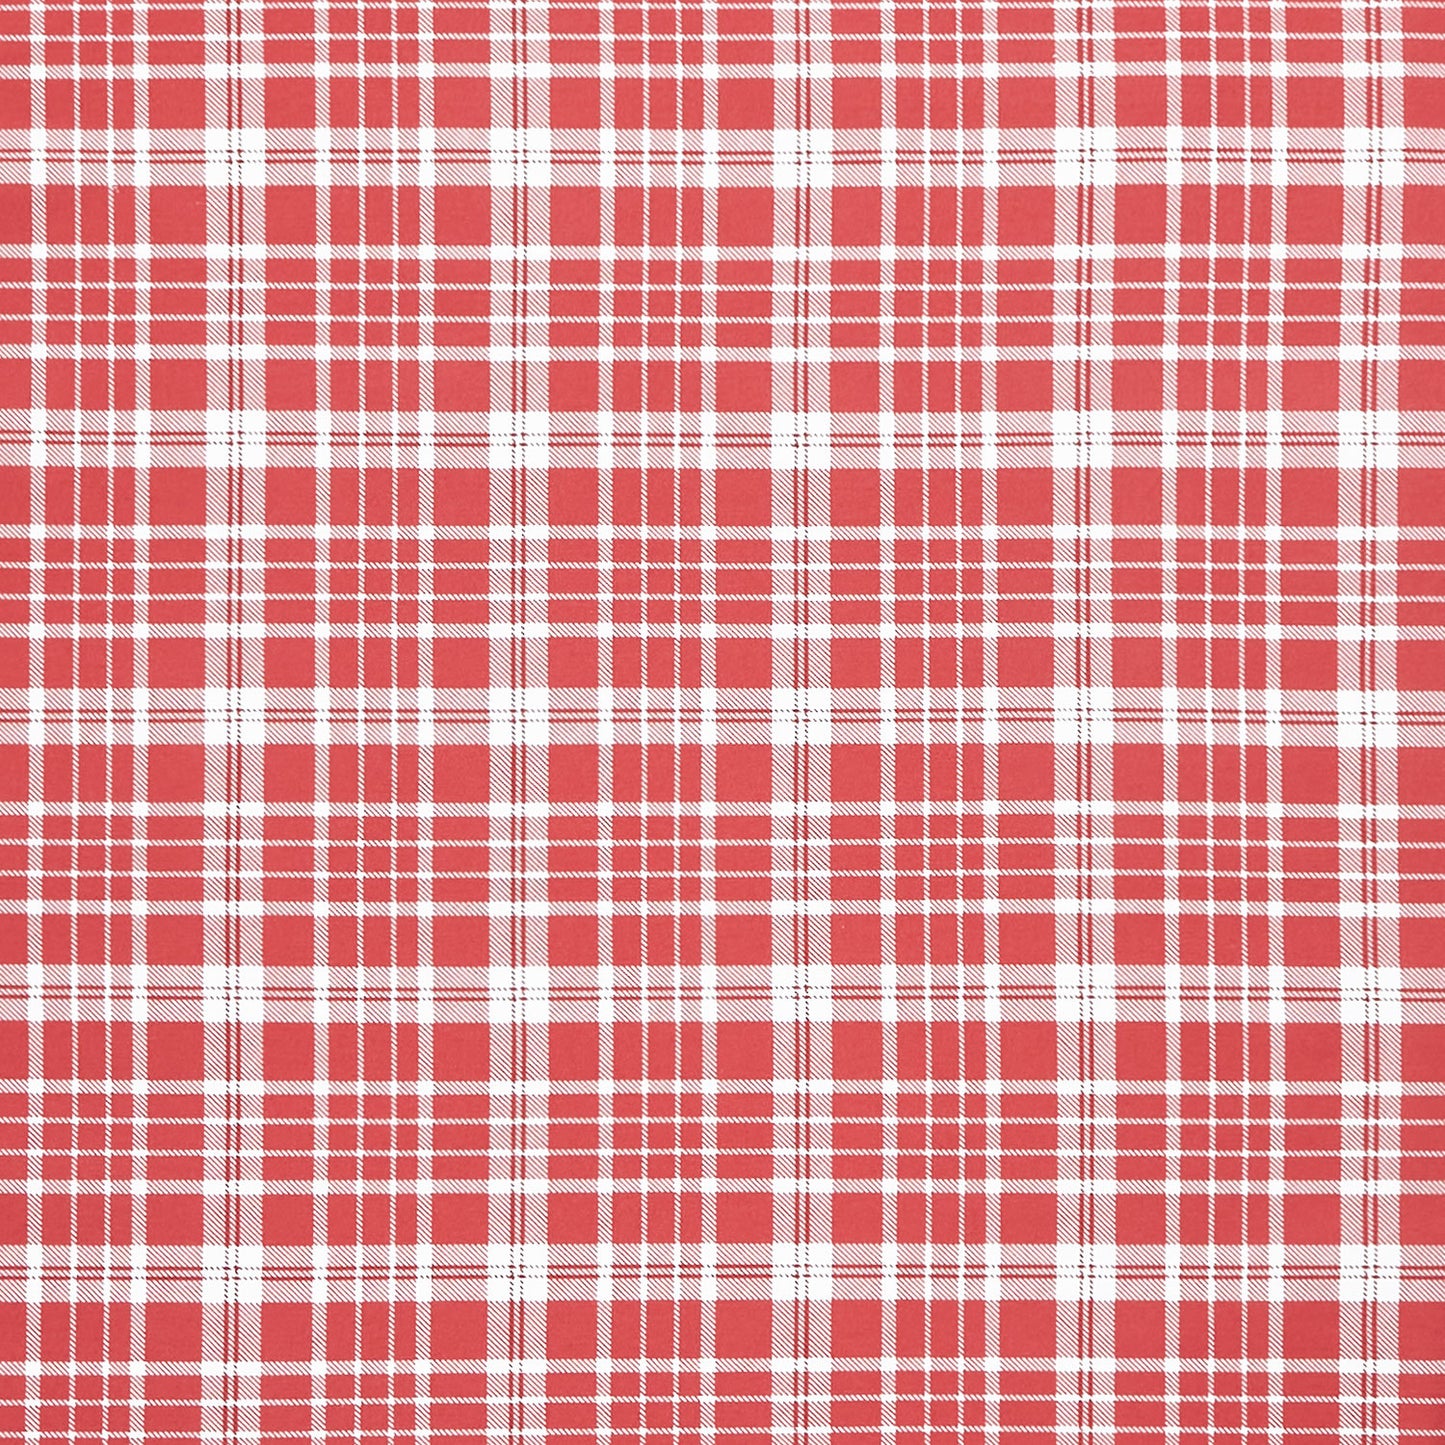 American Beauty - Plaid Red Yardage Primary Image